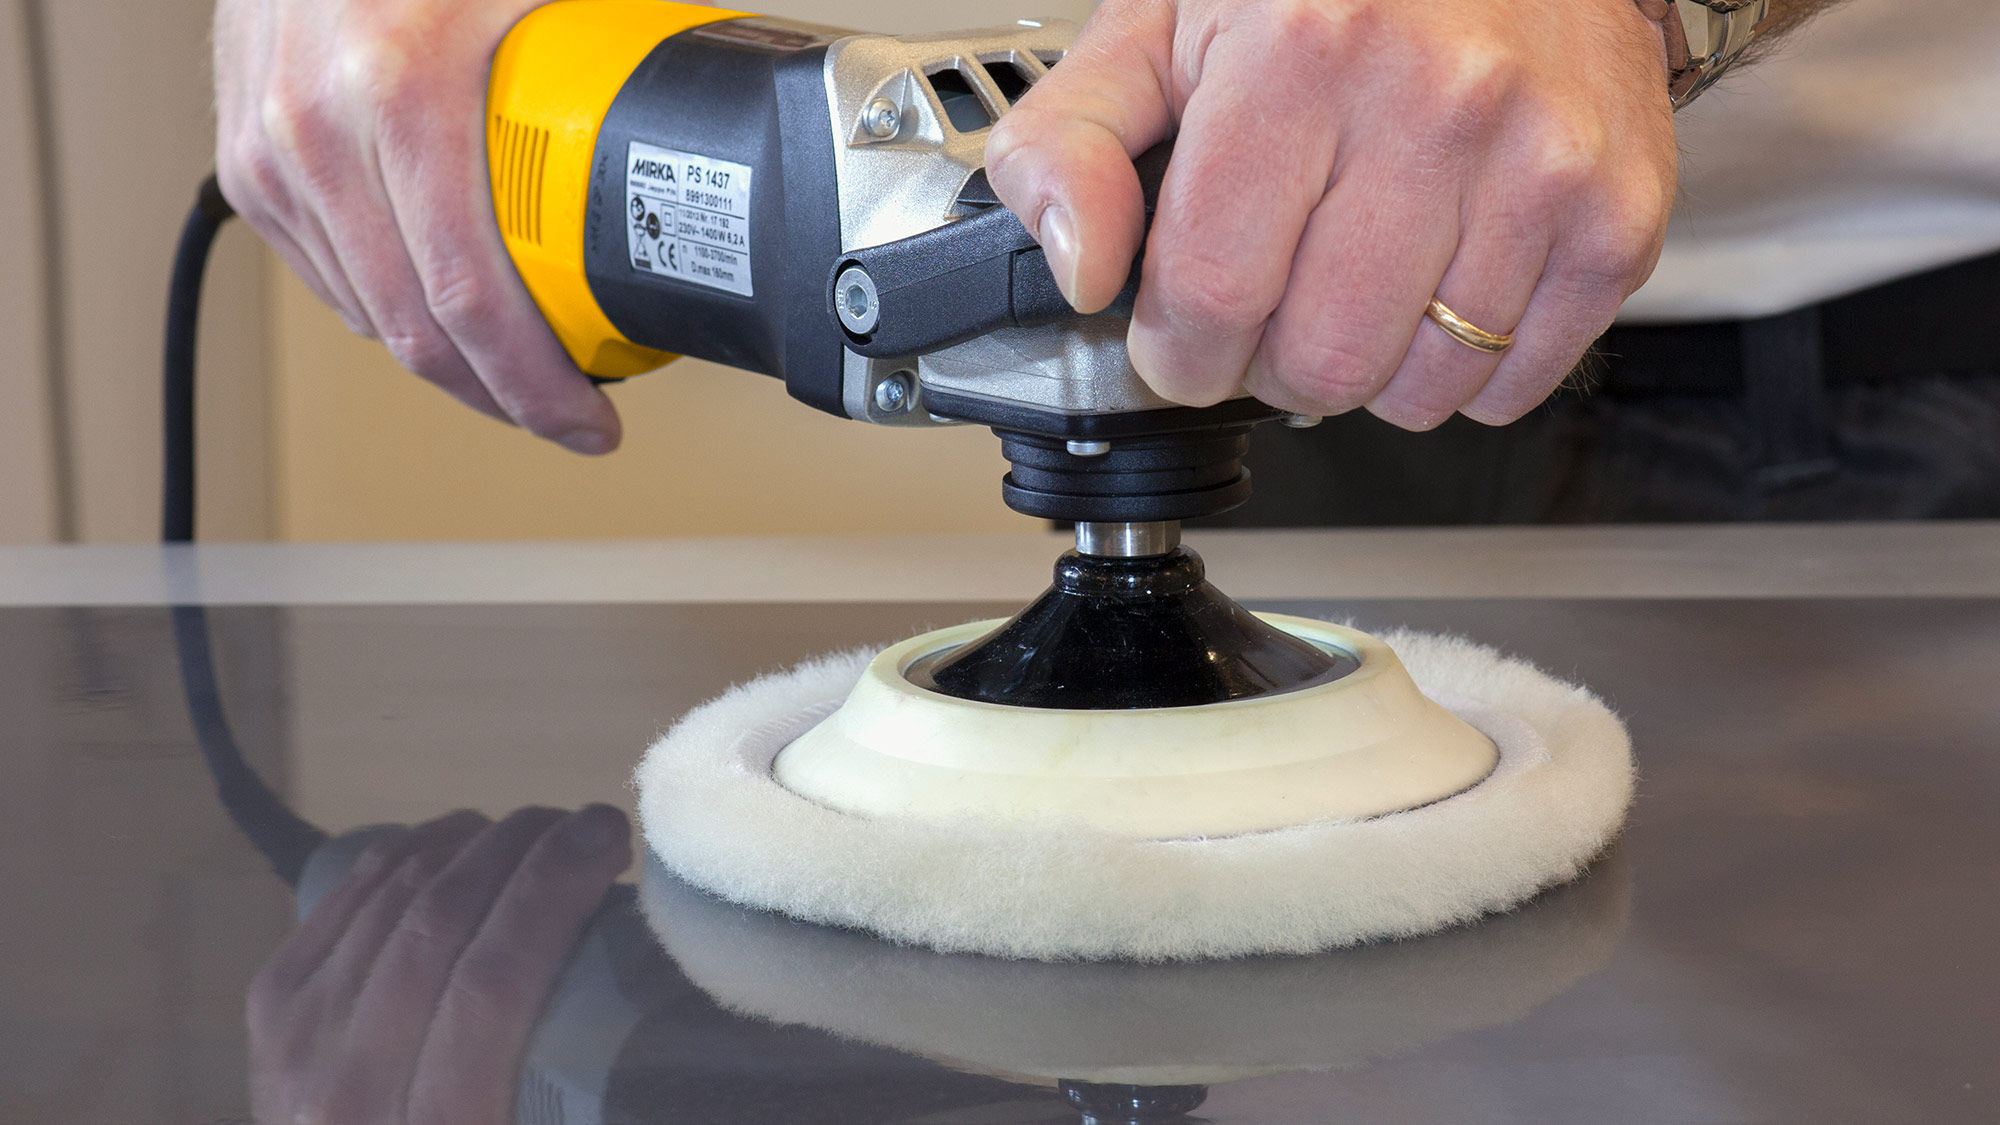 What Can You Achieve Using an Orbital Sander?